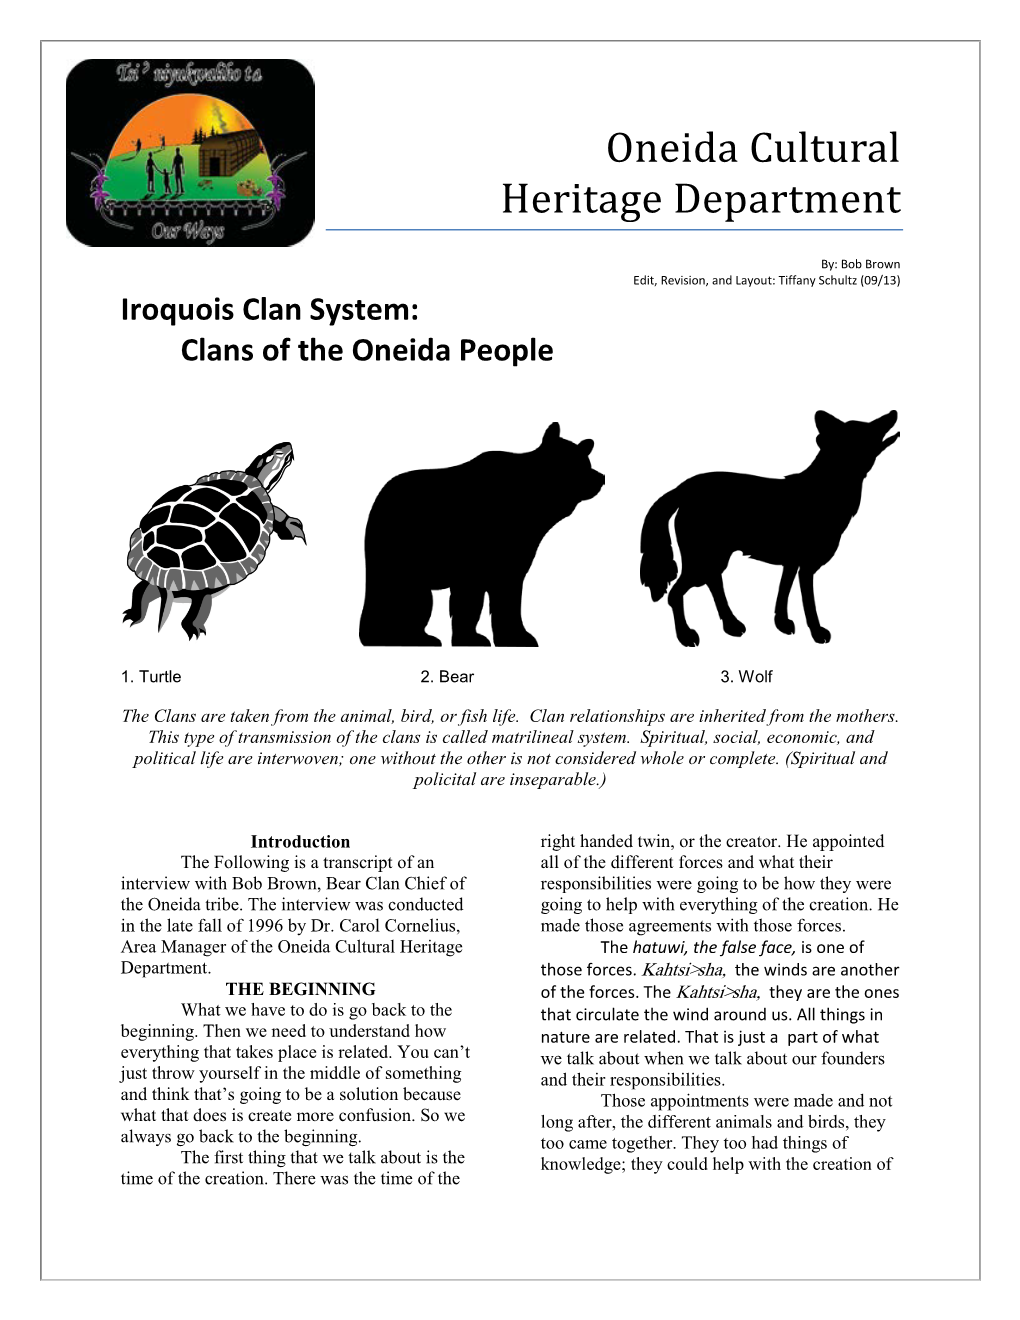 Iroquois Clan System Clans of the Oneida People